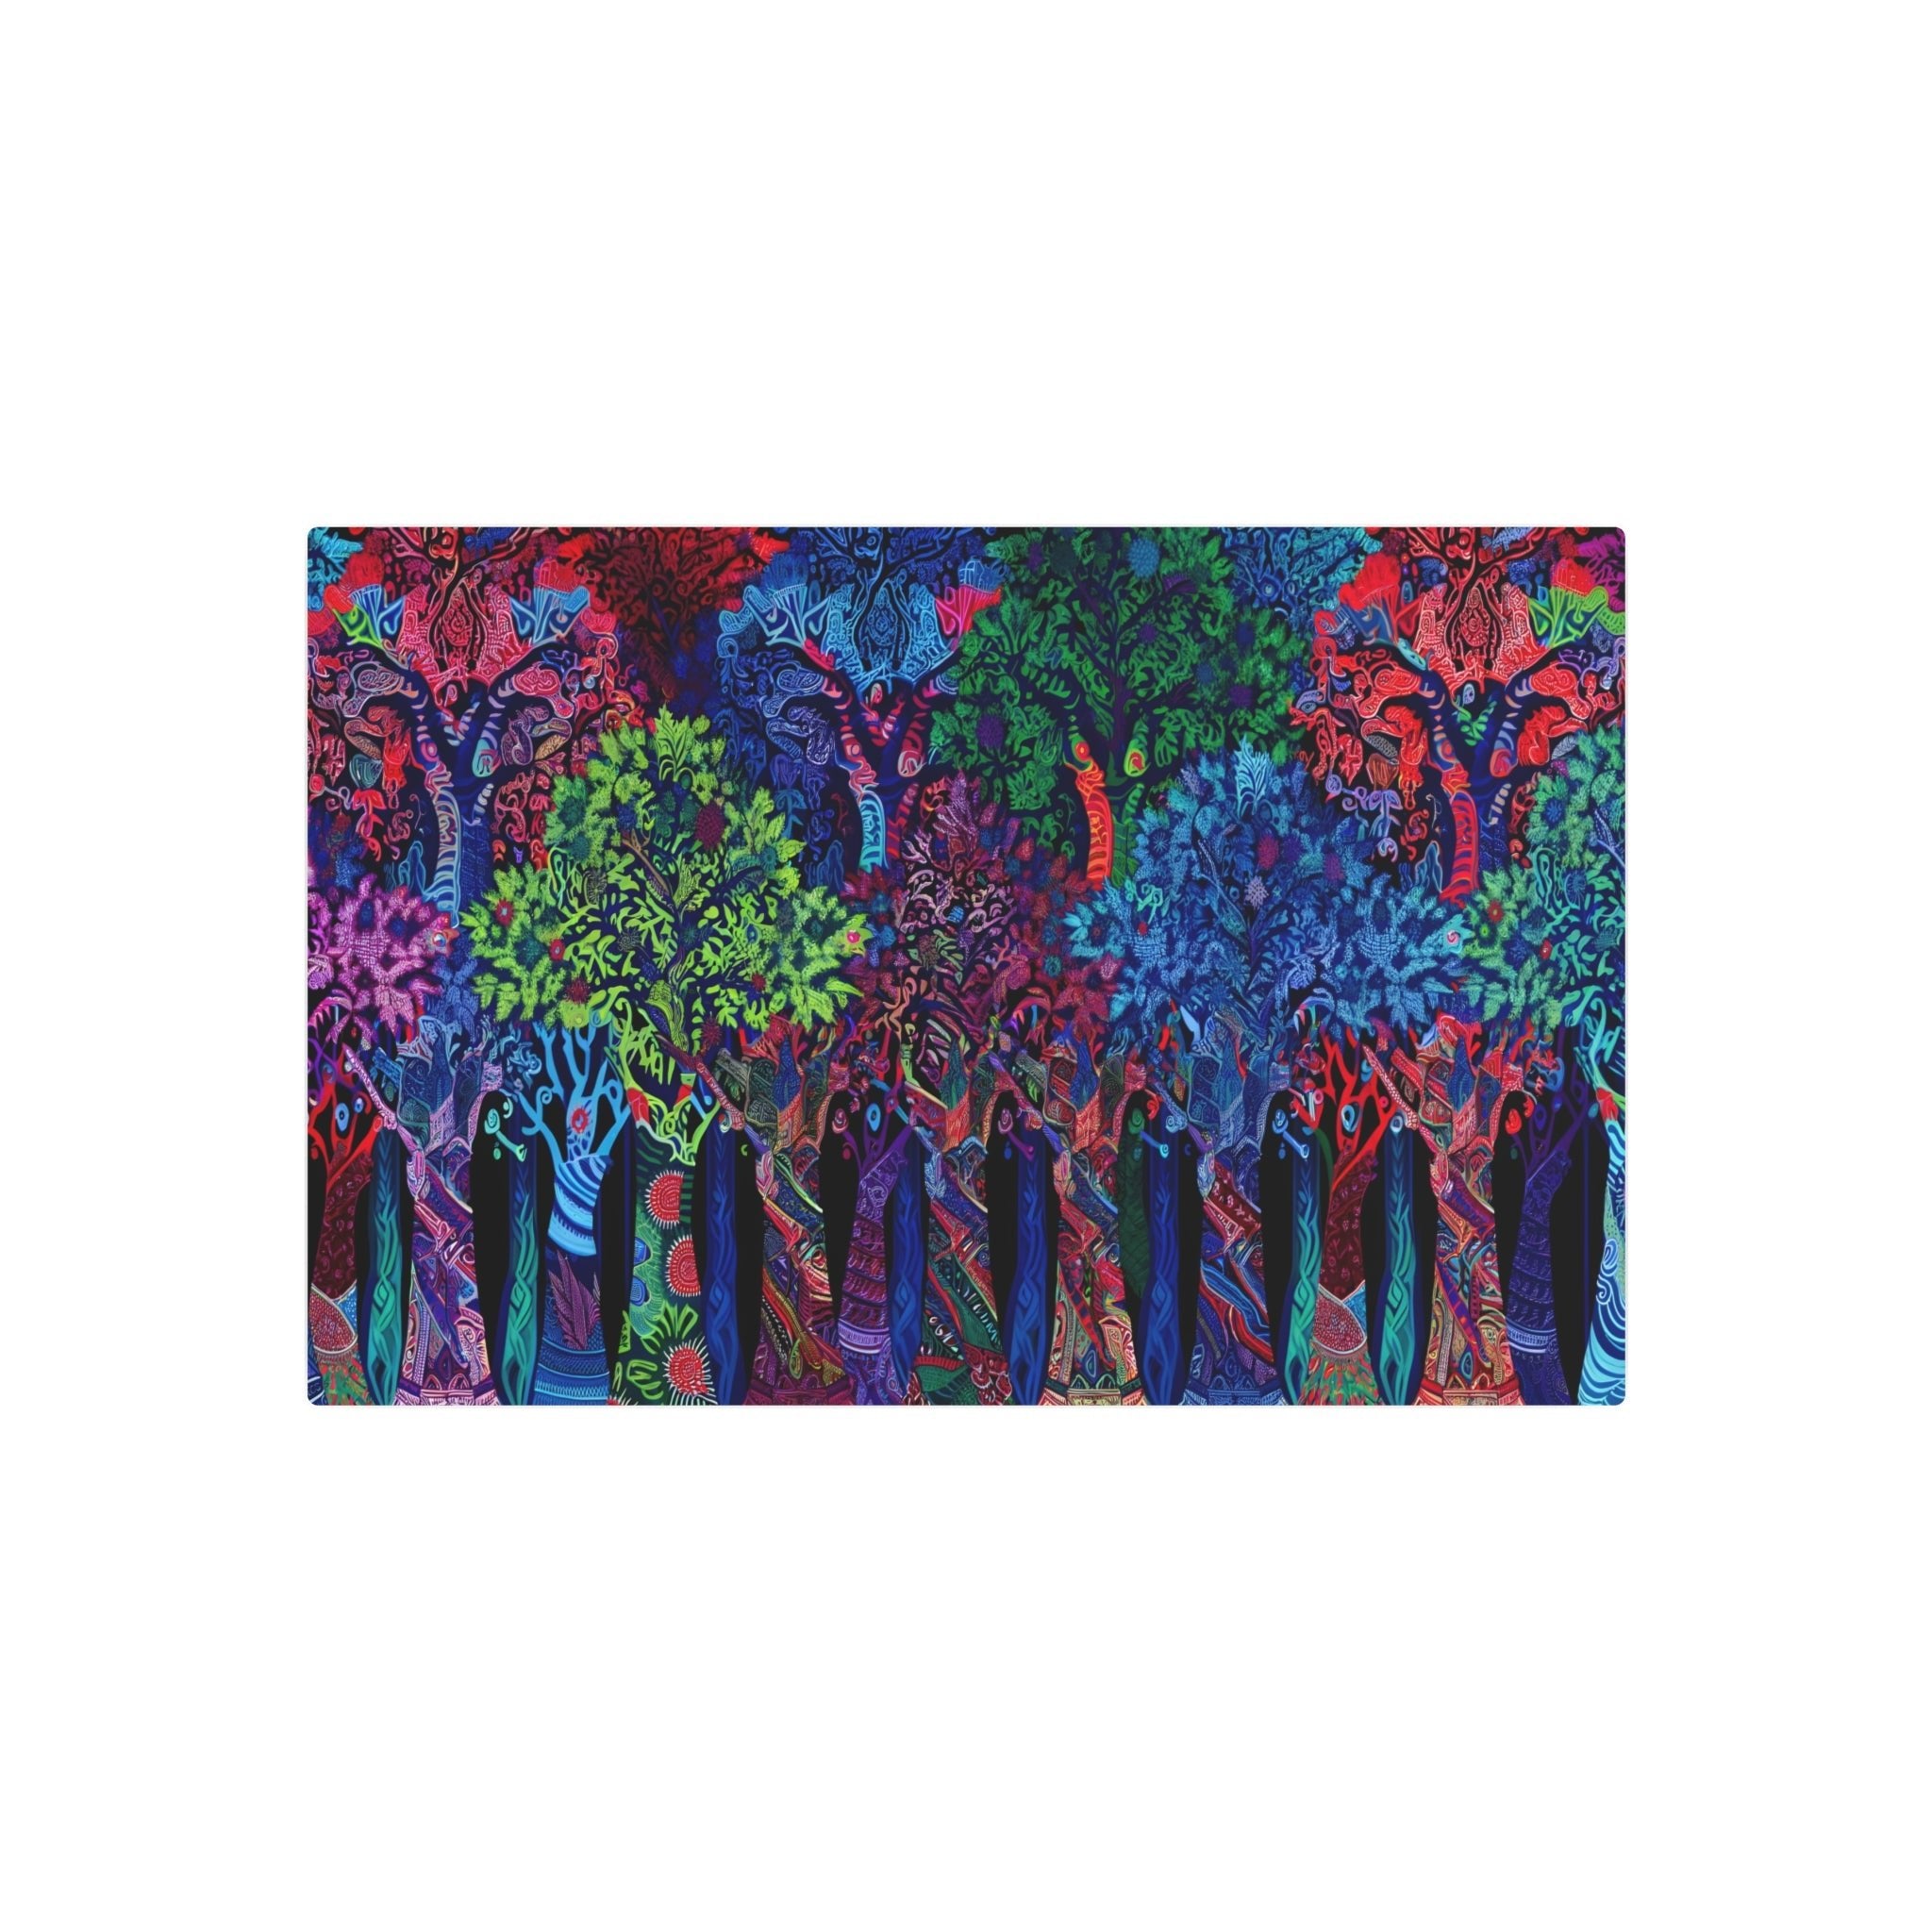 Metal Poster Art | "Indonesian Batik Art: Vibrant and Intricate Forest Scene with Detailed Patterned Trees - Authentic Non-Western Global Style Artwork" - Metal Poster Art 30″ x 20″ (Horizontal) 0.12''